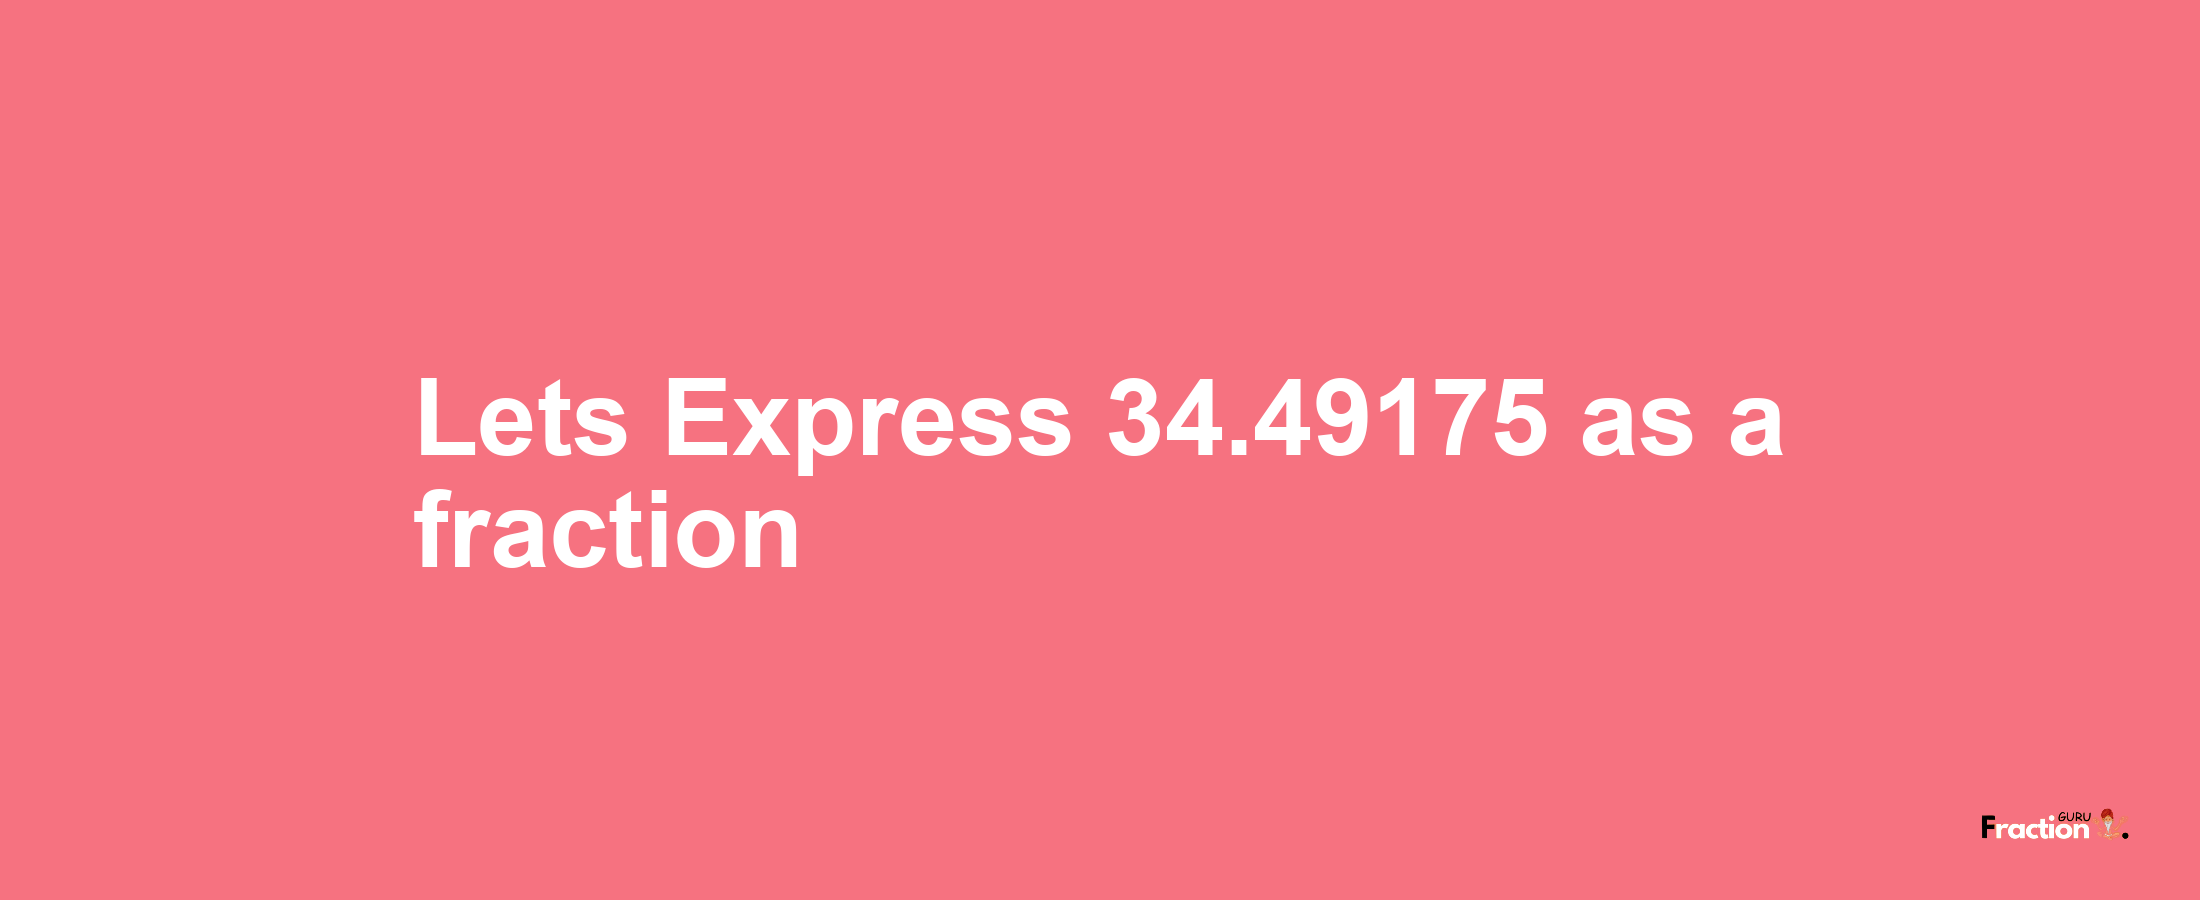 Lets Express 34.49175 as afraction